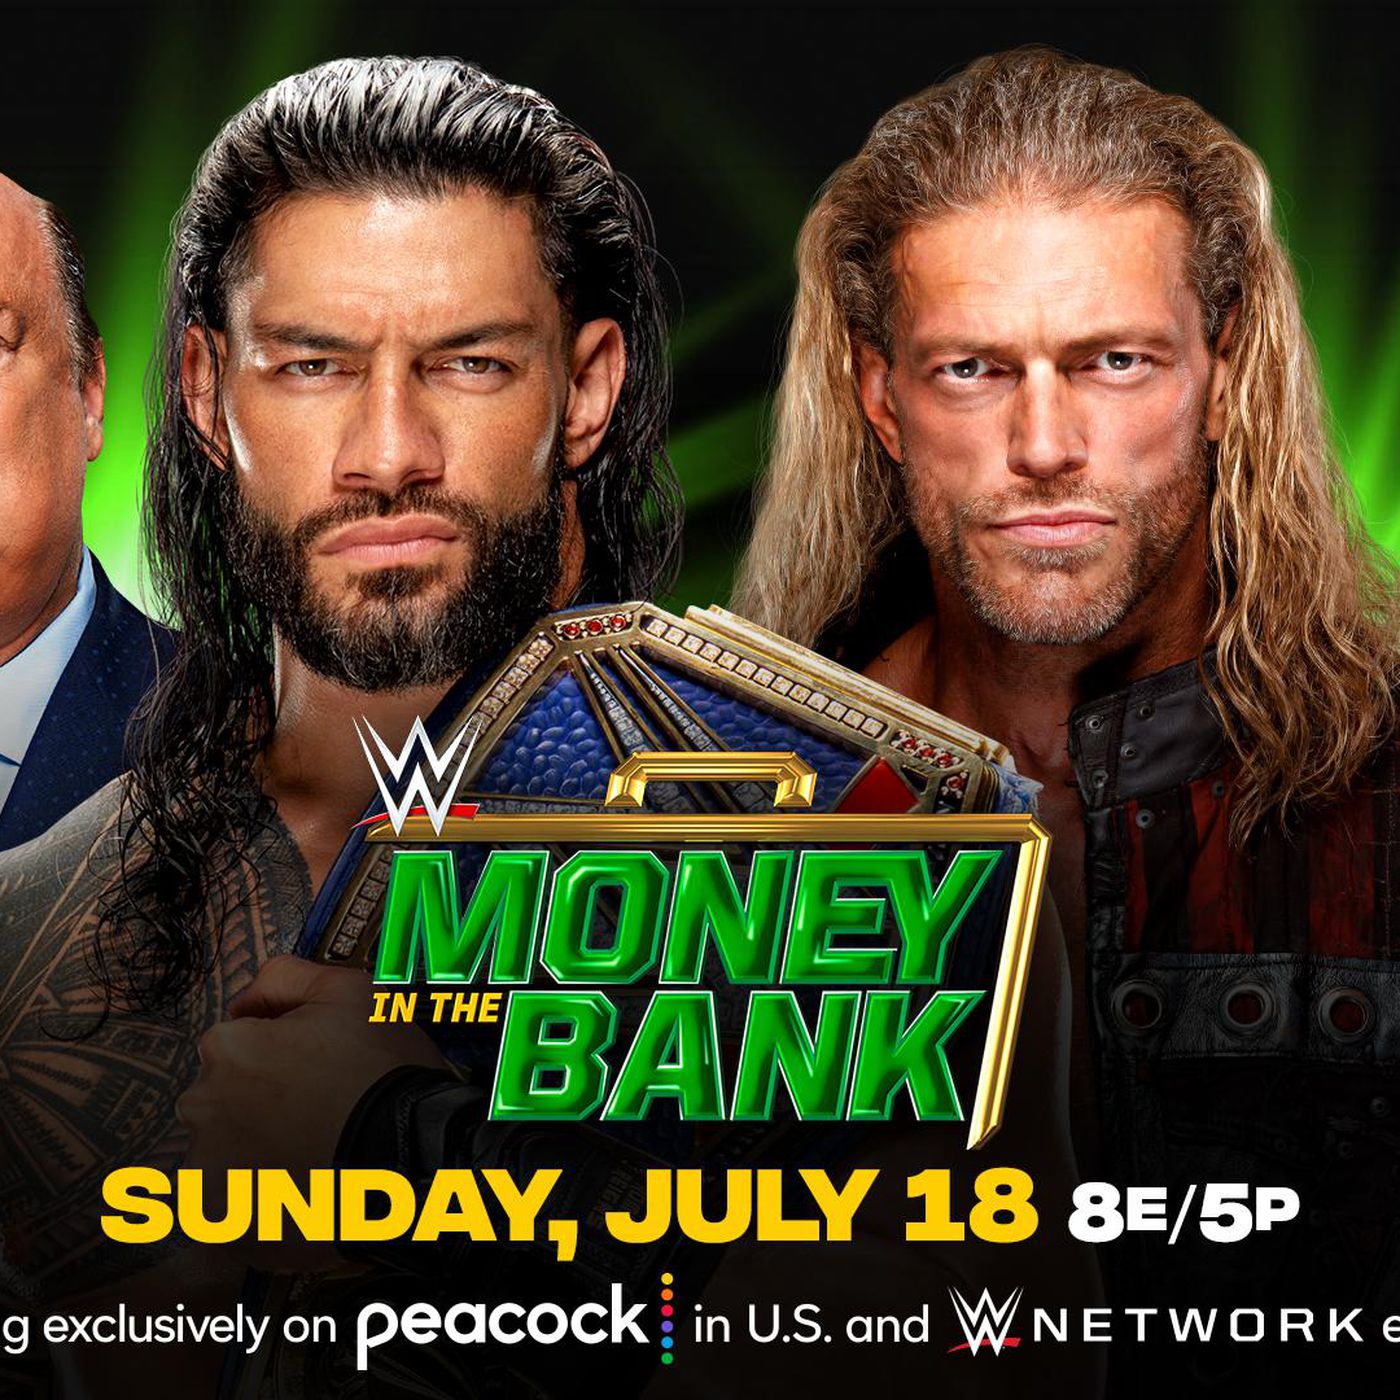 WWE Money in the Bank 2021 match card, rumors